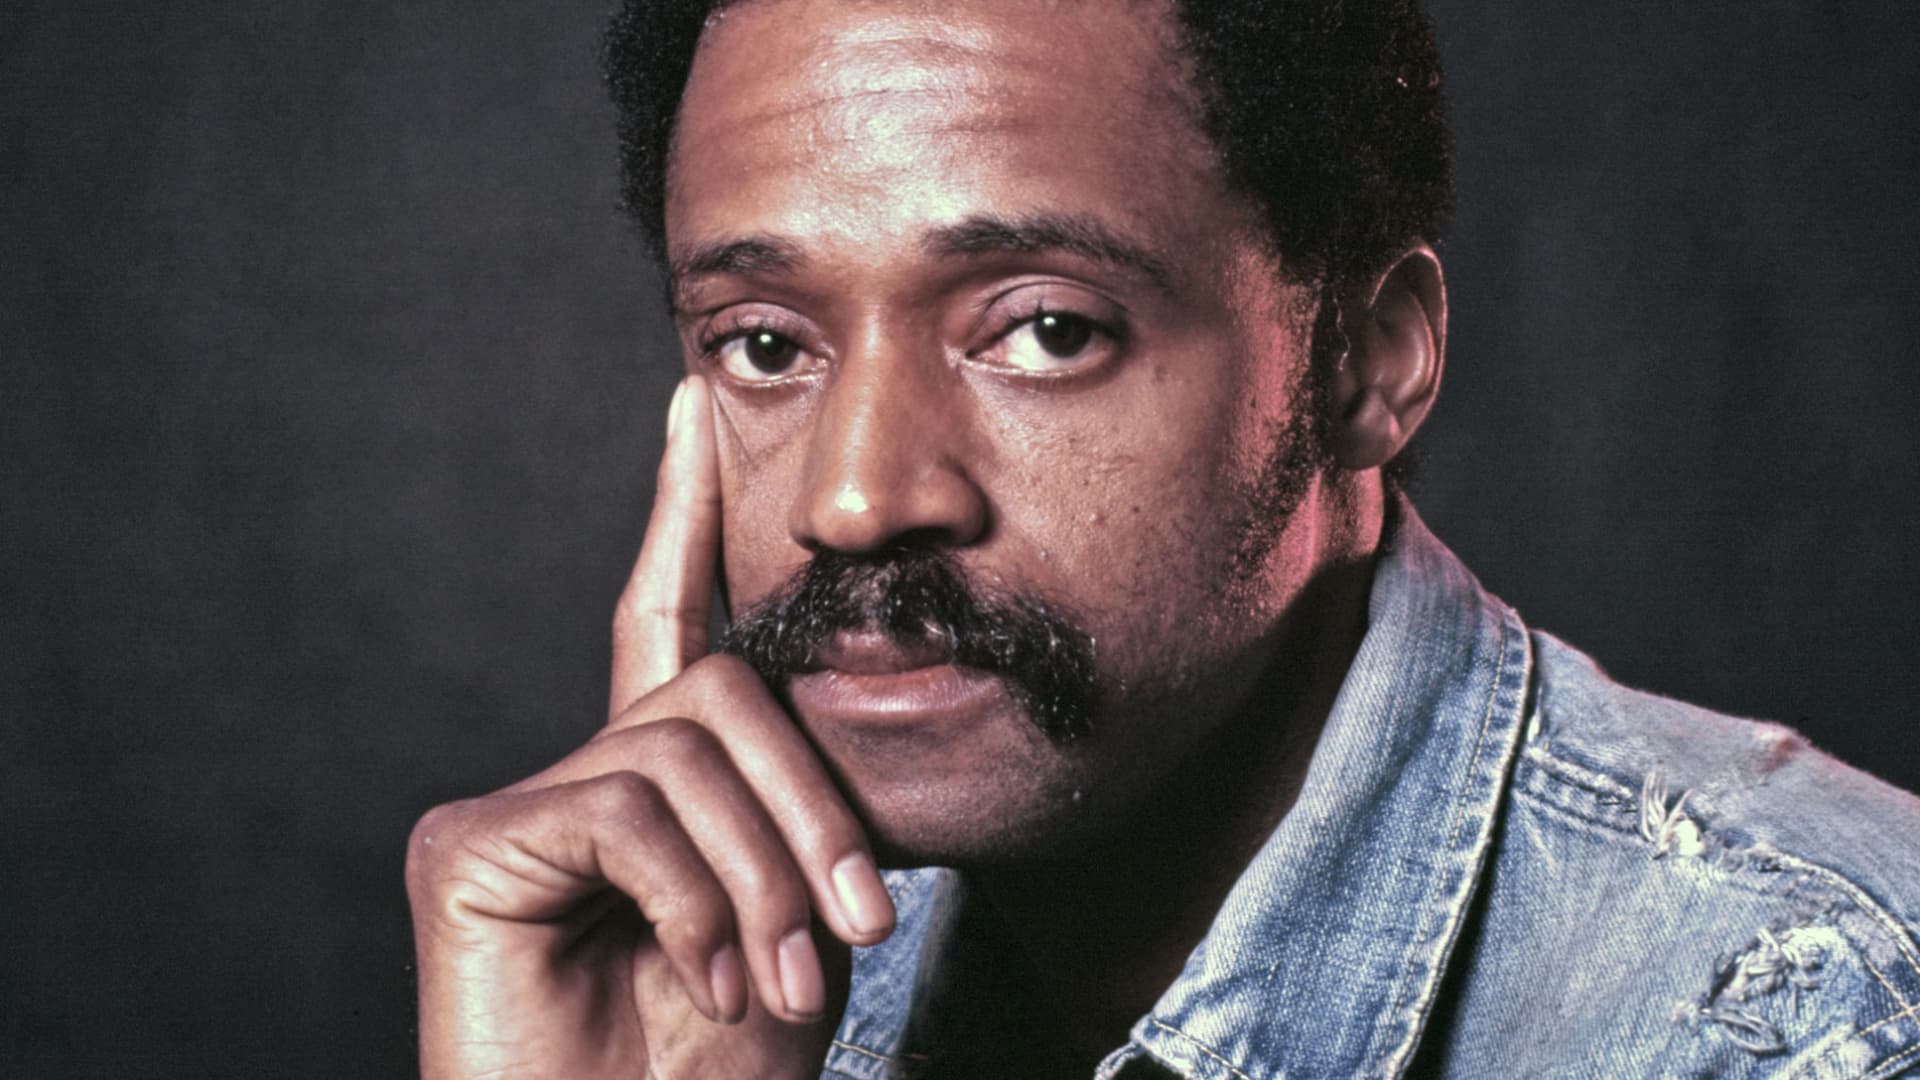 Actor, director, screenwriter, playwright, novelist and composer Melvin Van Peebles photographed in 1972.